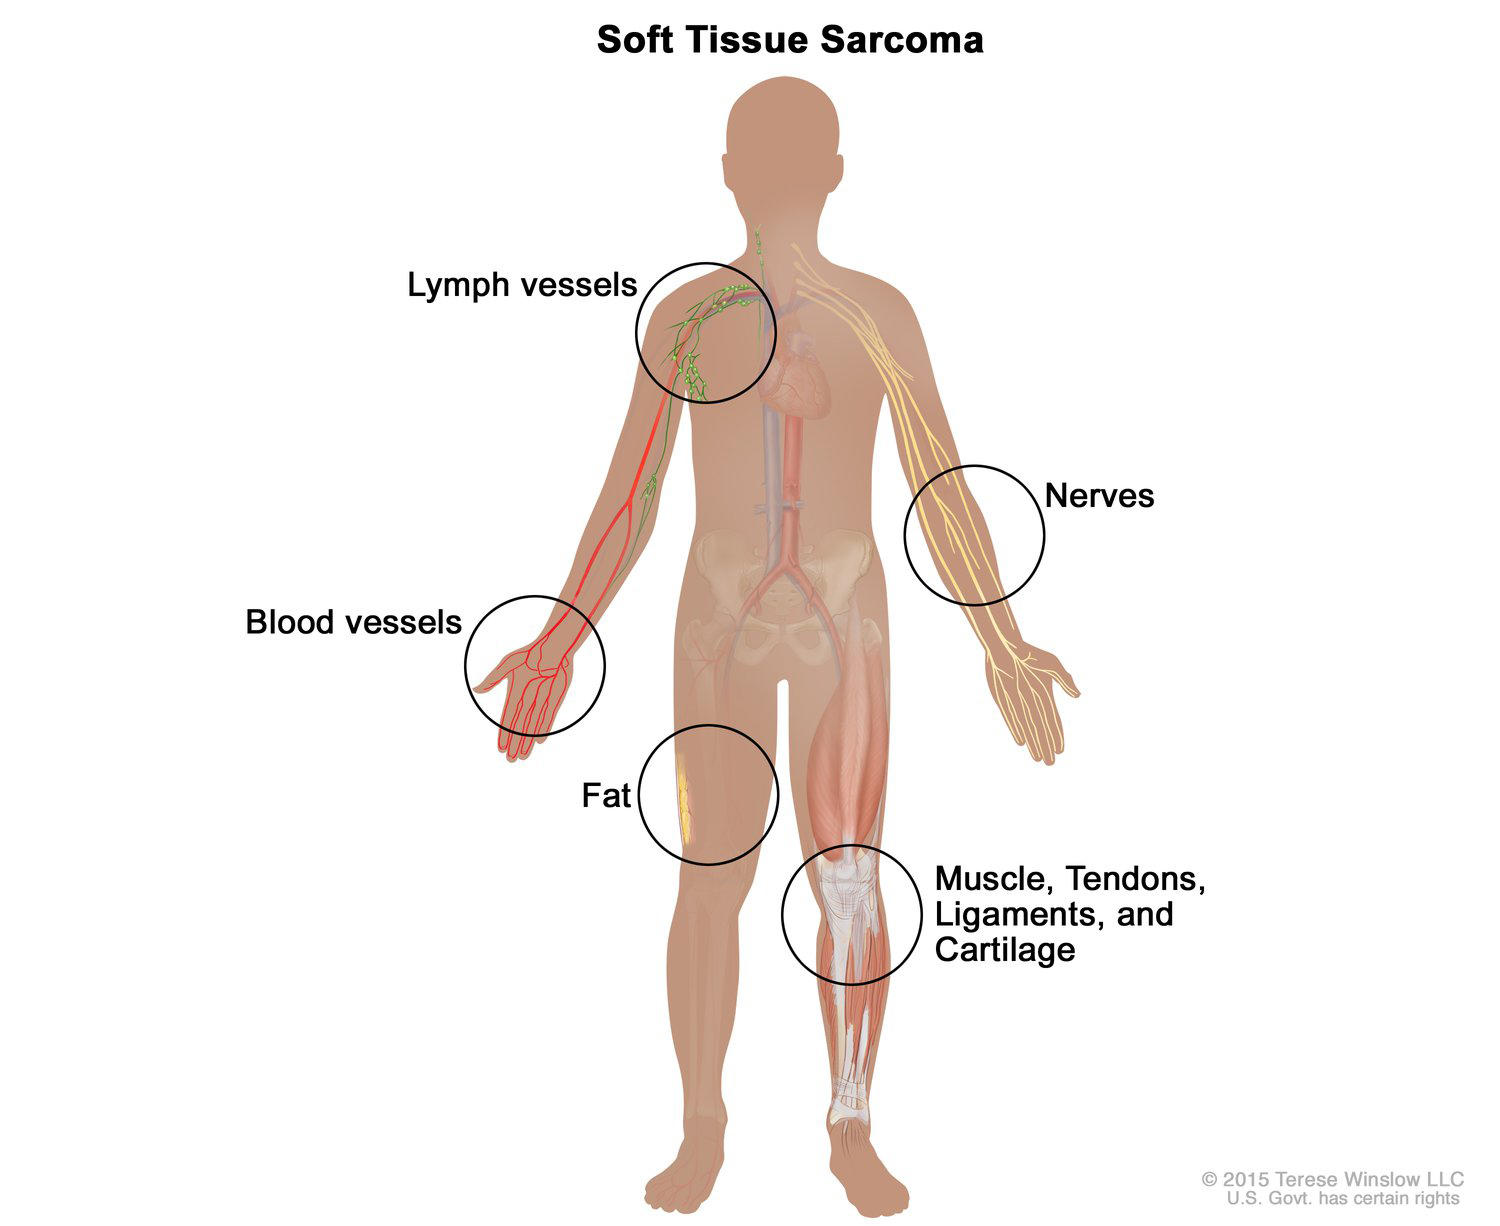 London cancer sarcoma guidelines, CARTE-PROF-APRODU-PRINTex - London cancer sarcoma guidelines